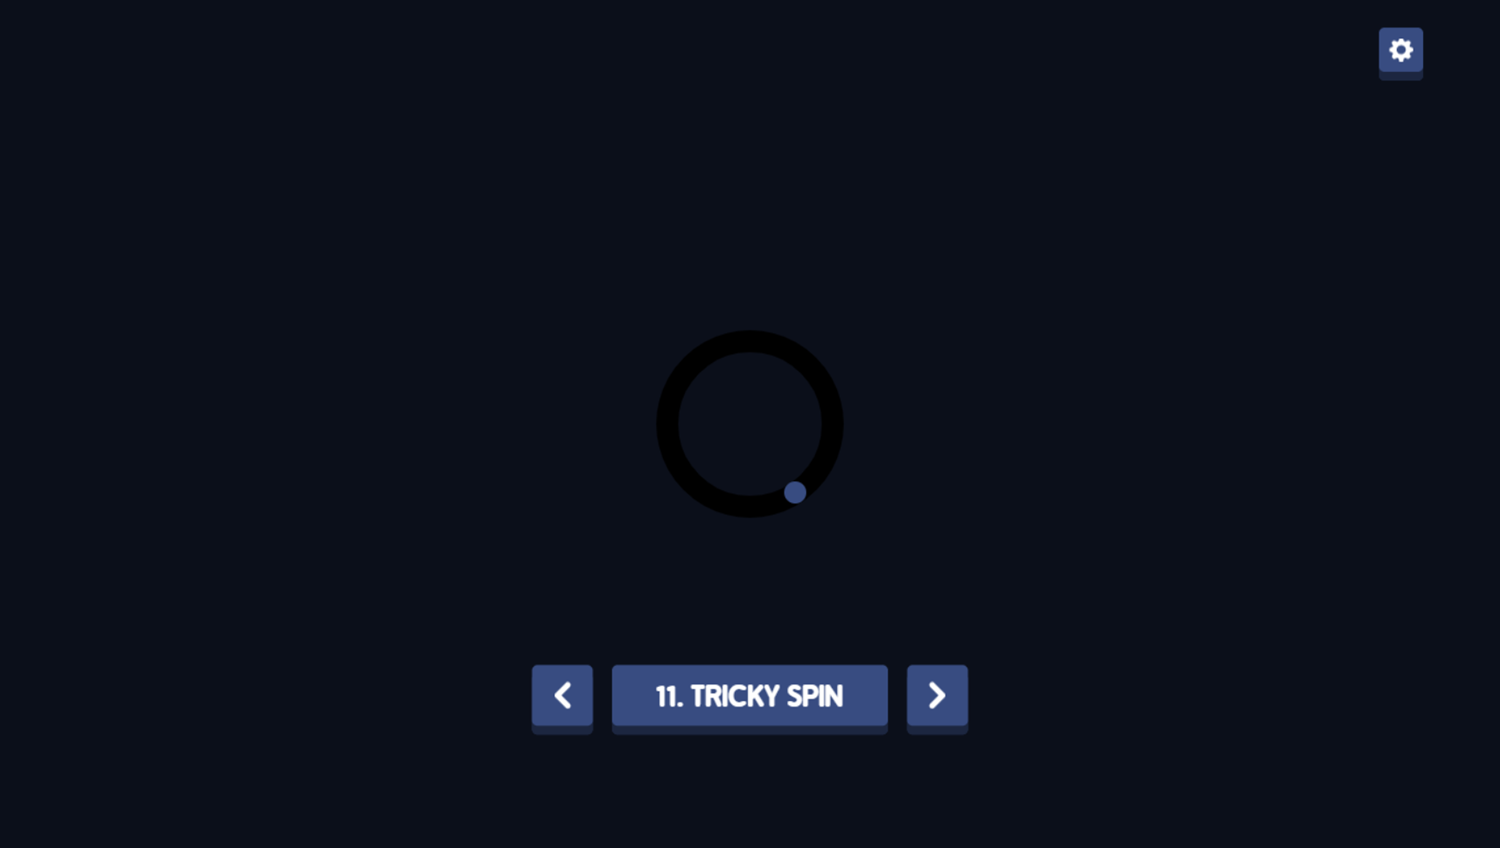 Mini Games Game 11 Tricky Spin Screenshot.